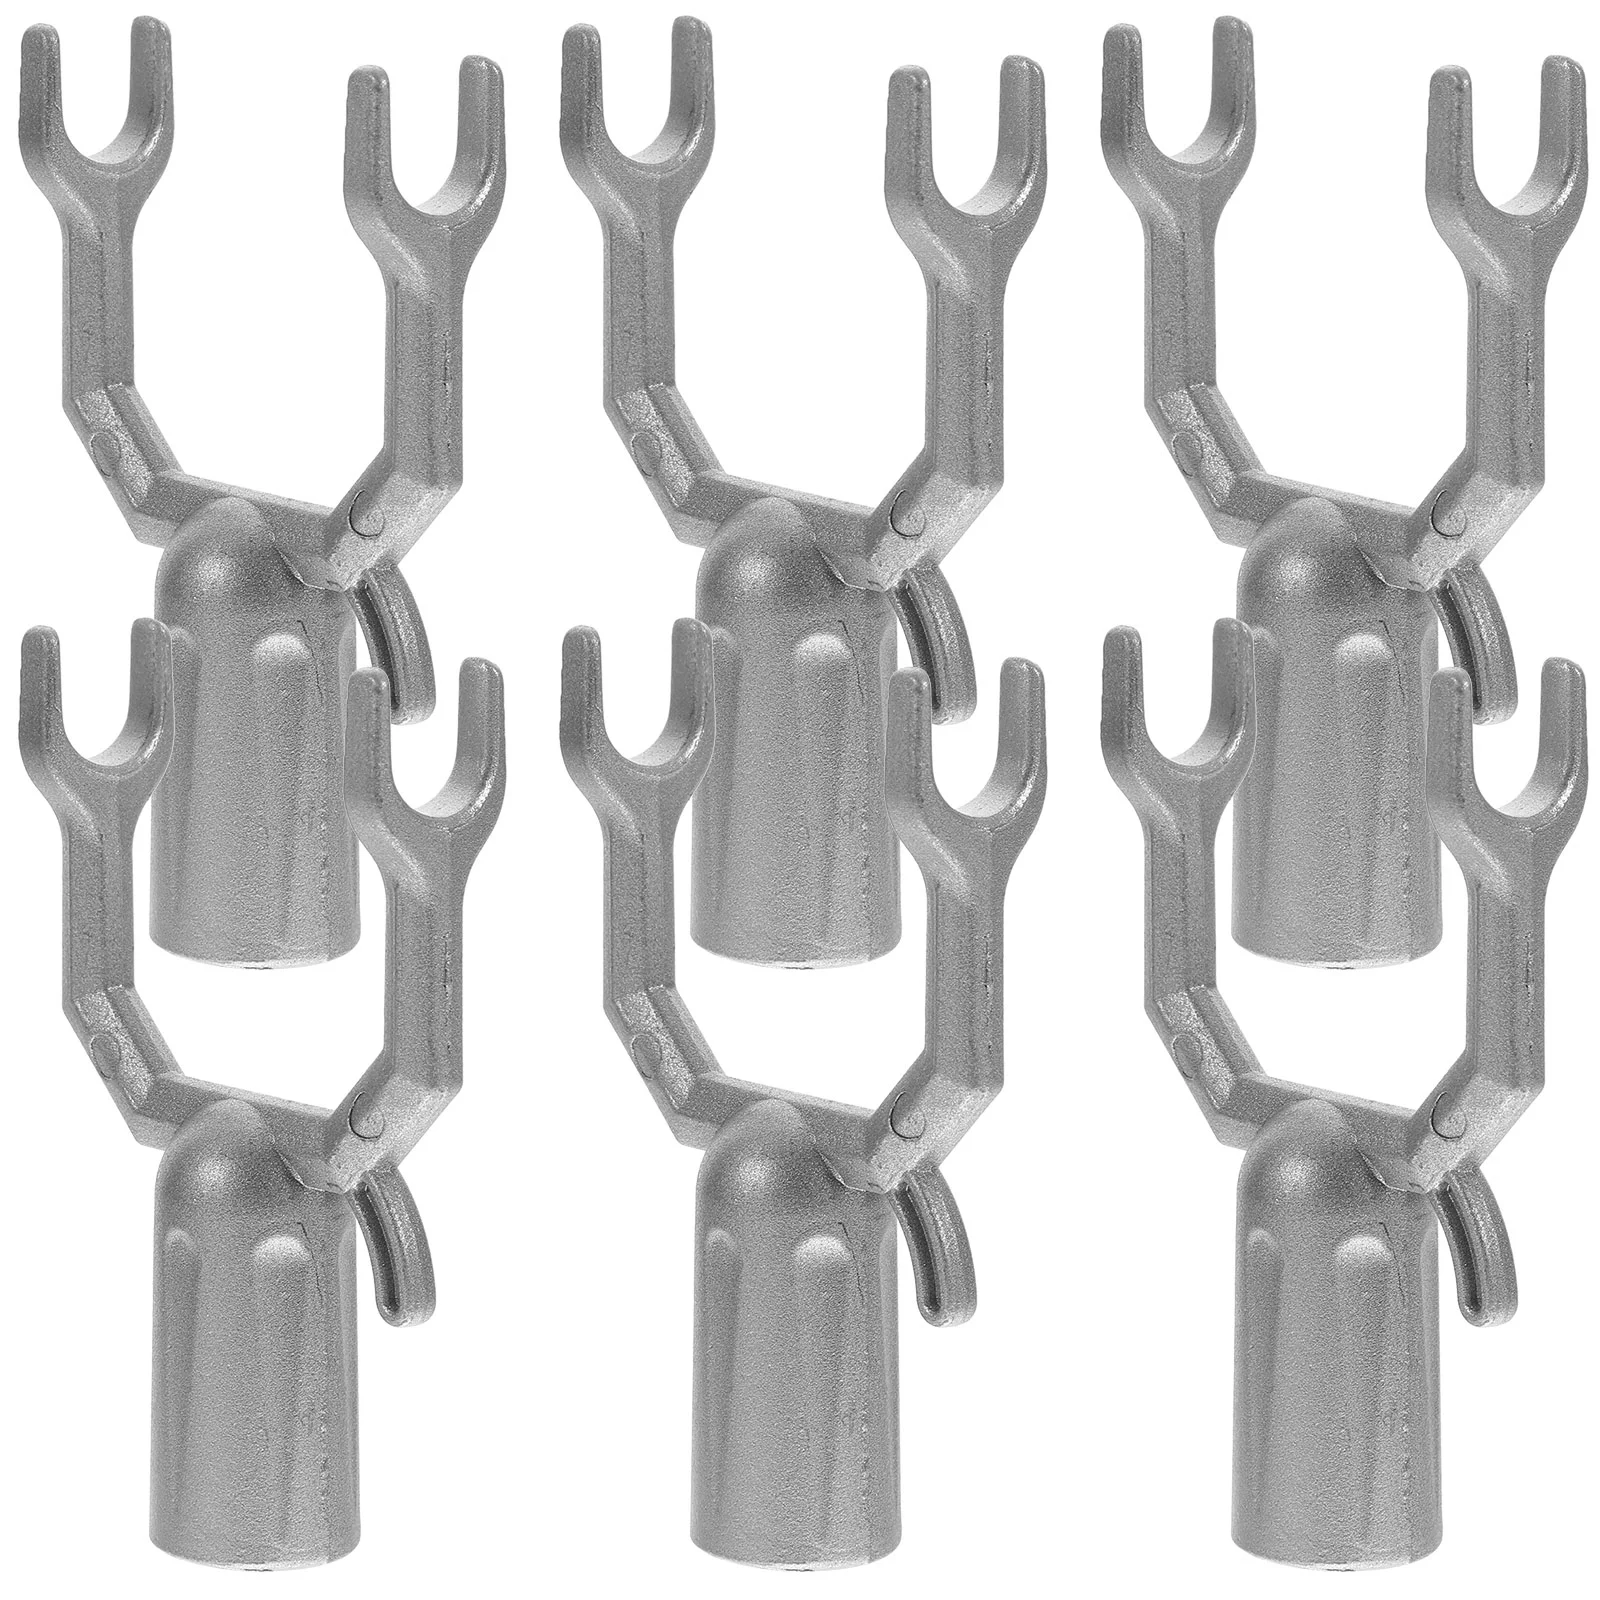 

6 Pcs Branch Plug Tree Topper Holder Support Accessories Stump Stakes Supports Leaning Trees Aluminum Alloy Kit